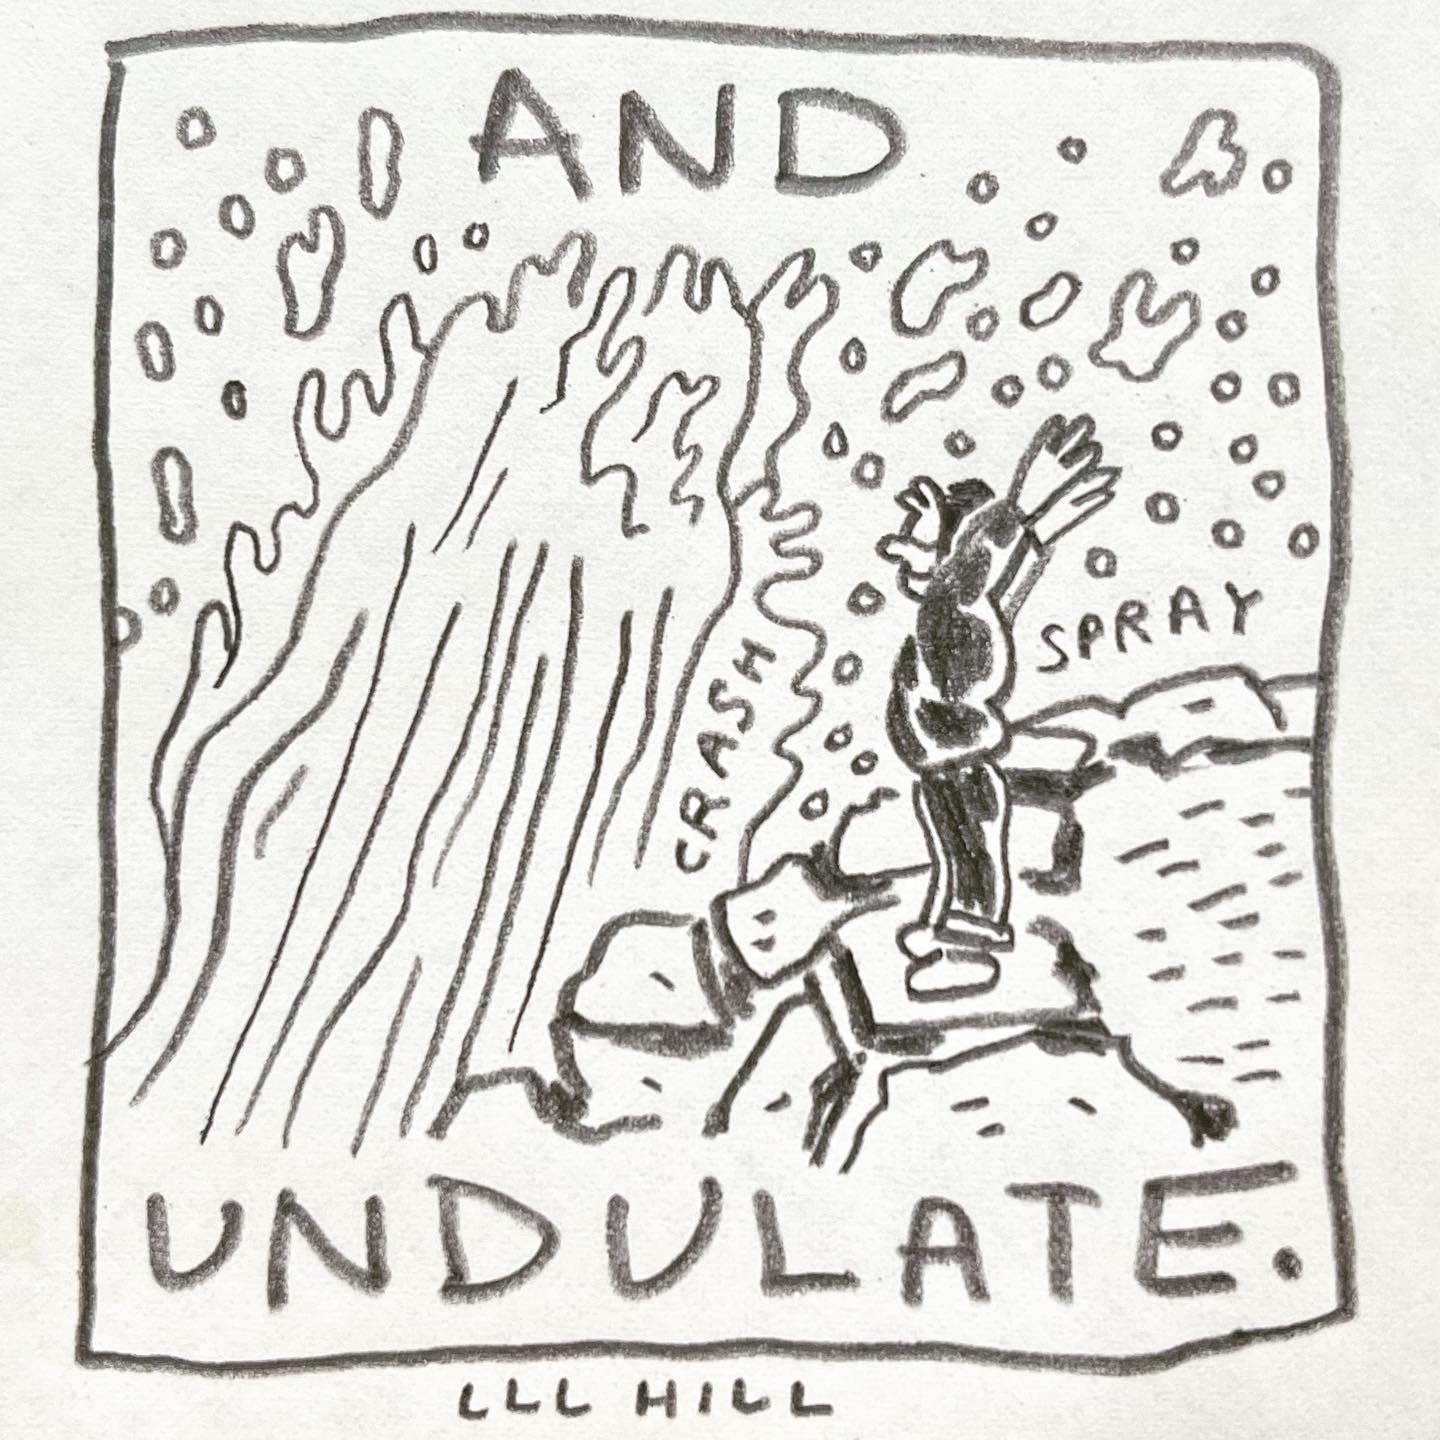 Panel 6: and undulate. Image: we see Lark from the side, standing on the rocks, smiling, eyes closed, arms thrown up and back above their head. A huge wave is crashing against the rocks. It shoots straight up, taller than Lark, and surrounds them with thick, flying drops.